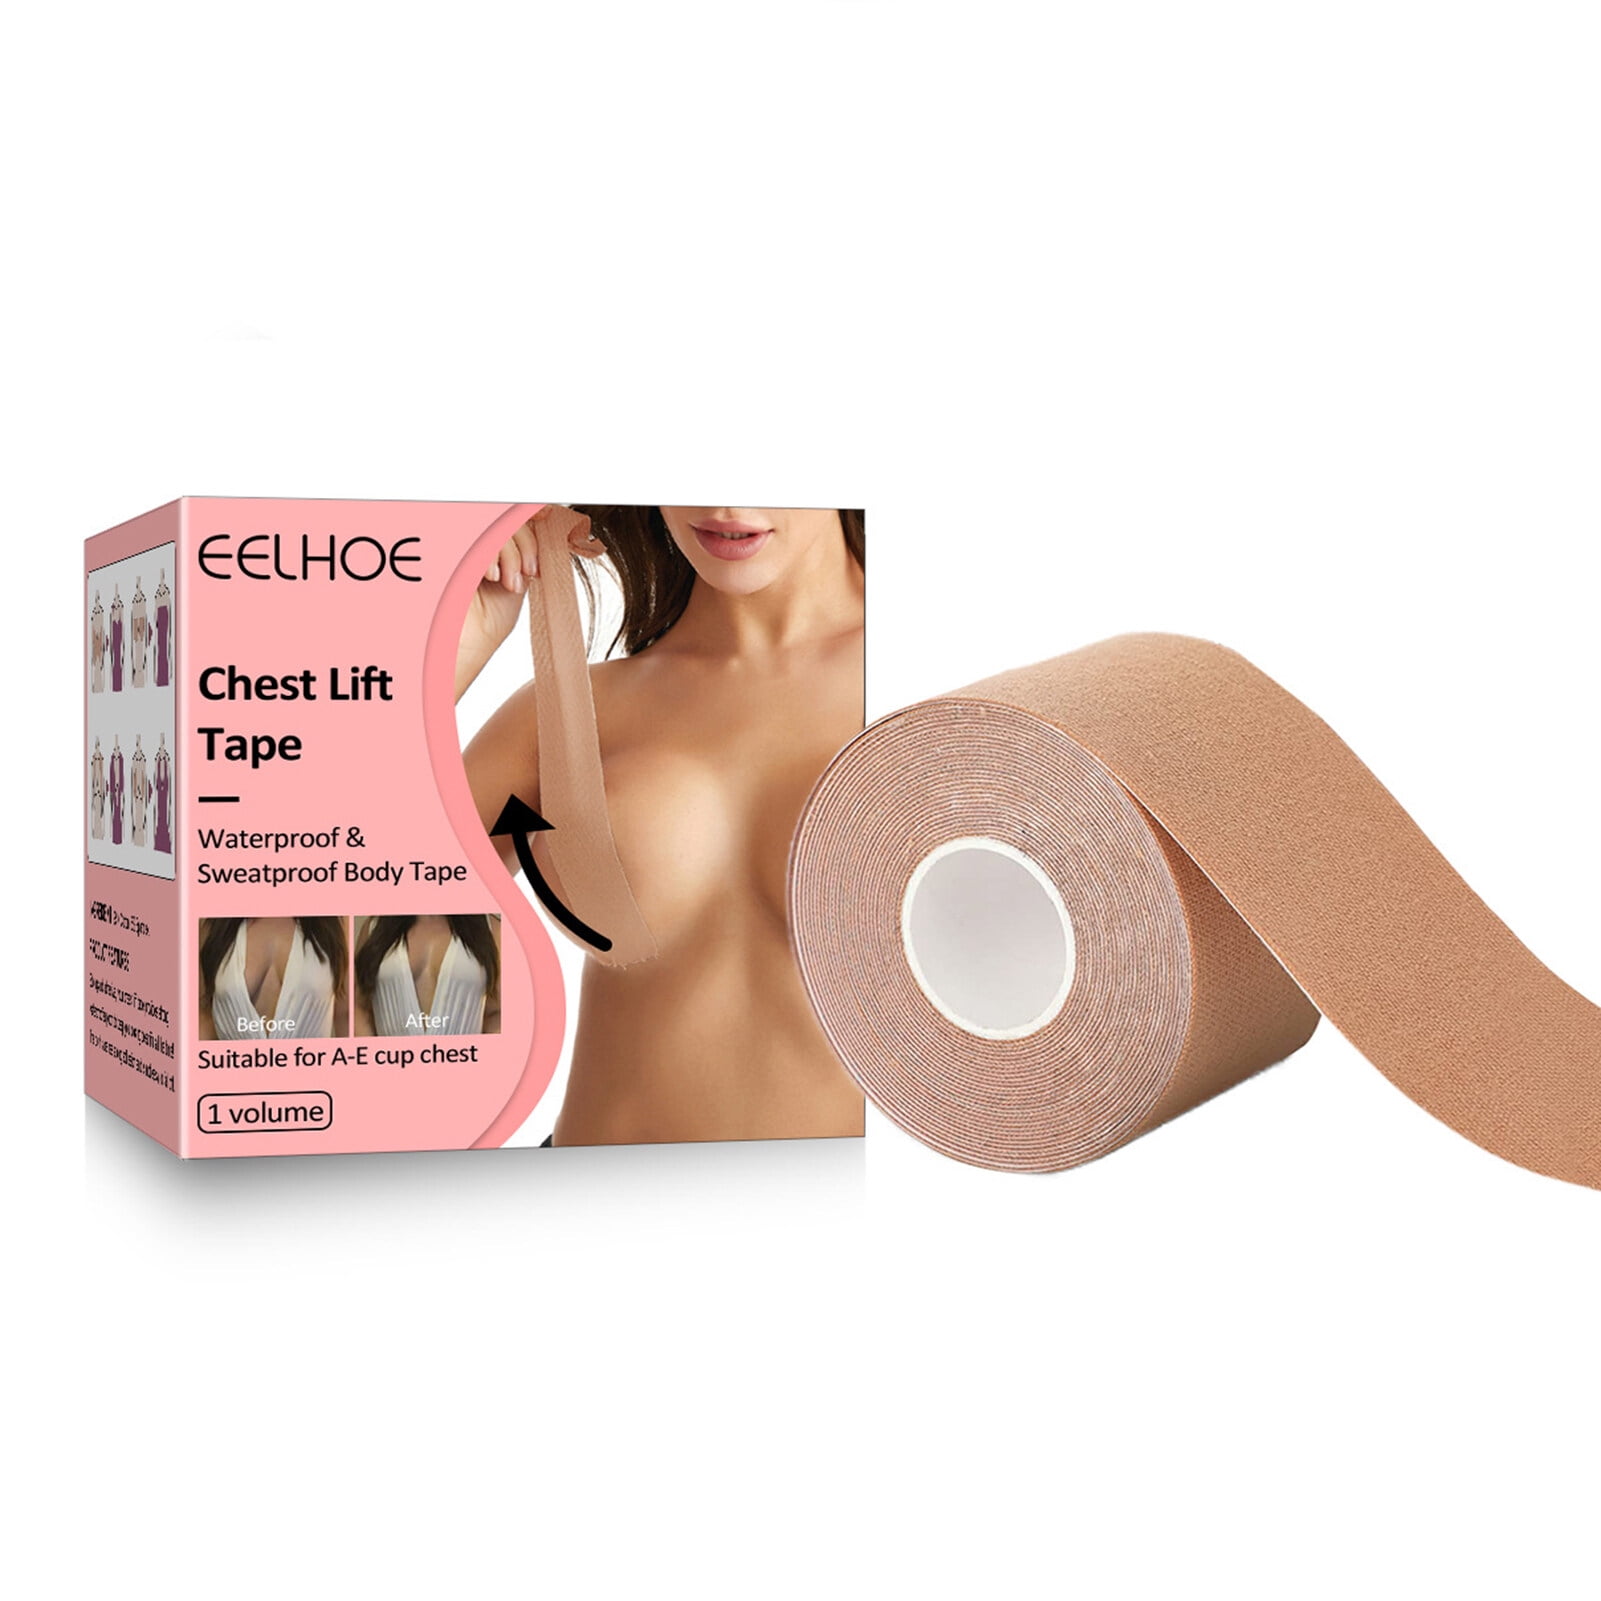 Tomshoo 1 Invisible Chest Lift Tape Breathable Waterproof Body Tape  -sagging Self-adhesive Lift Sports Bandage